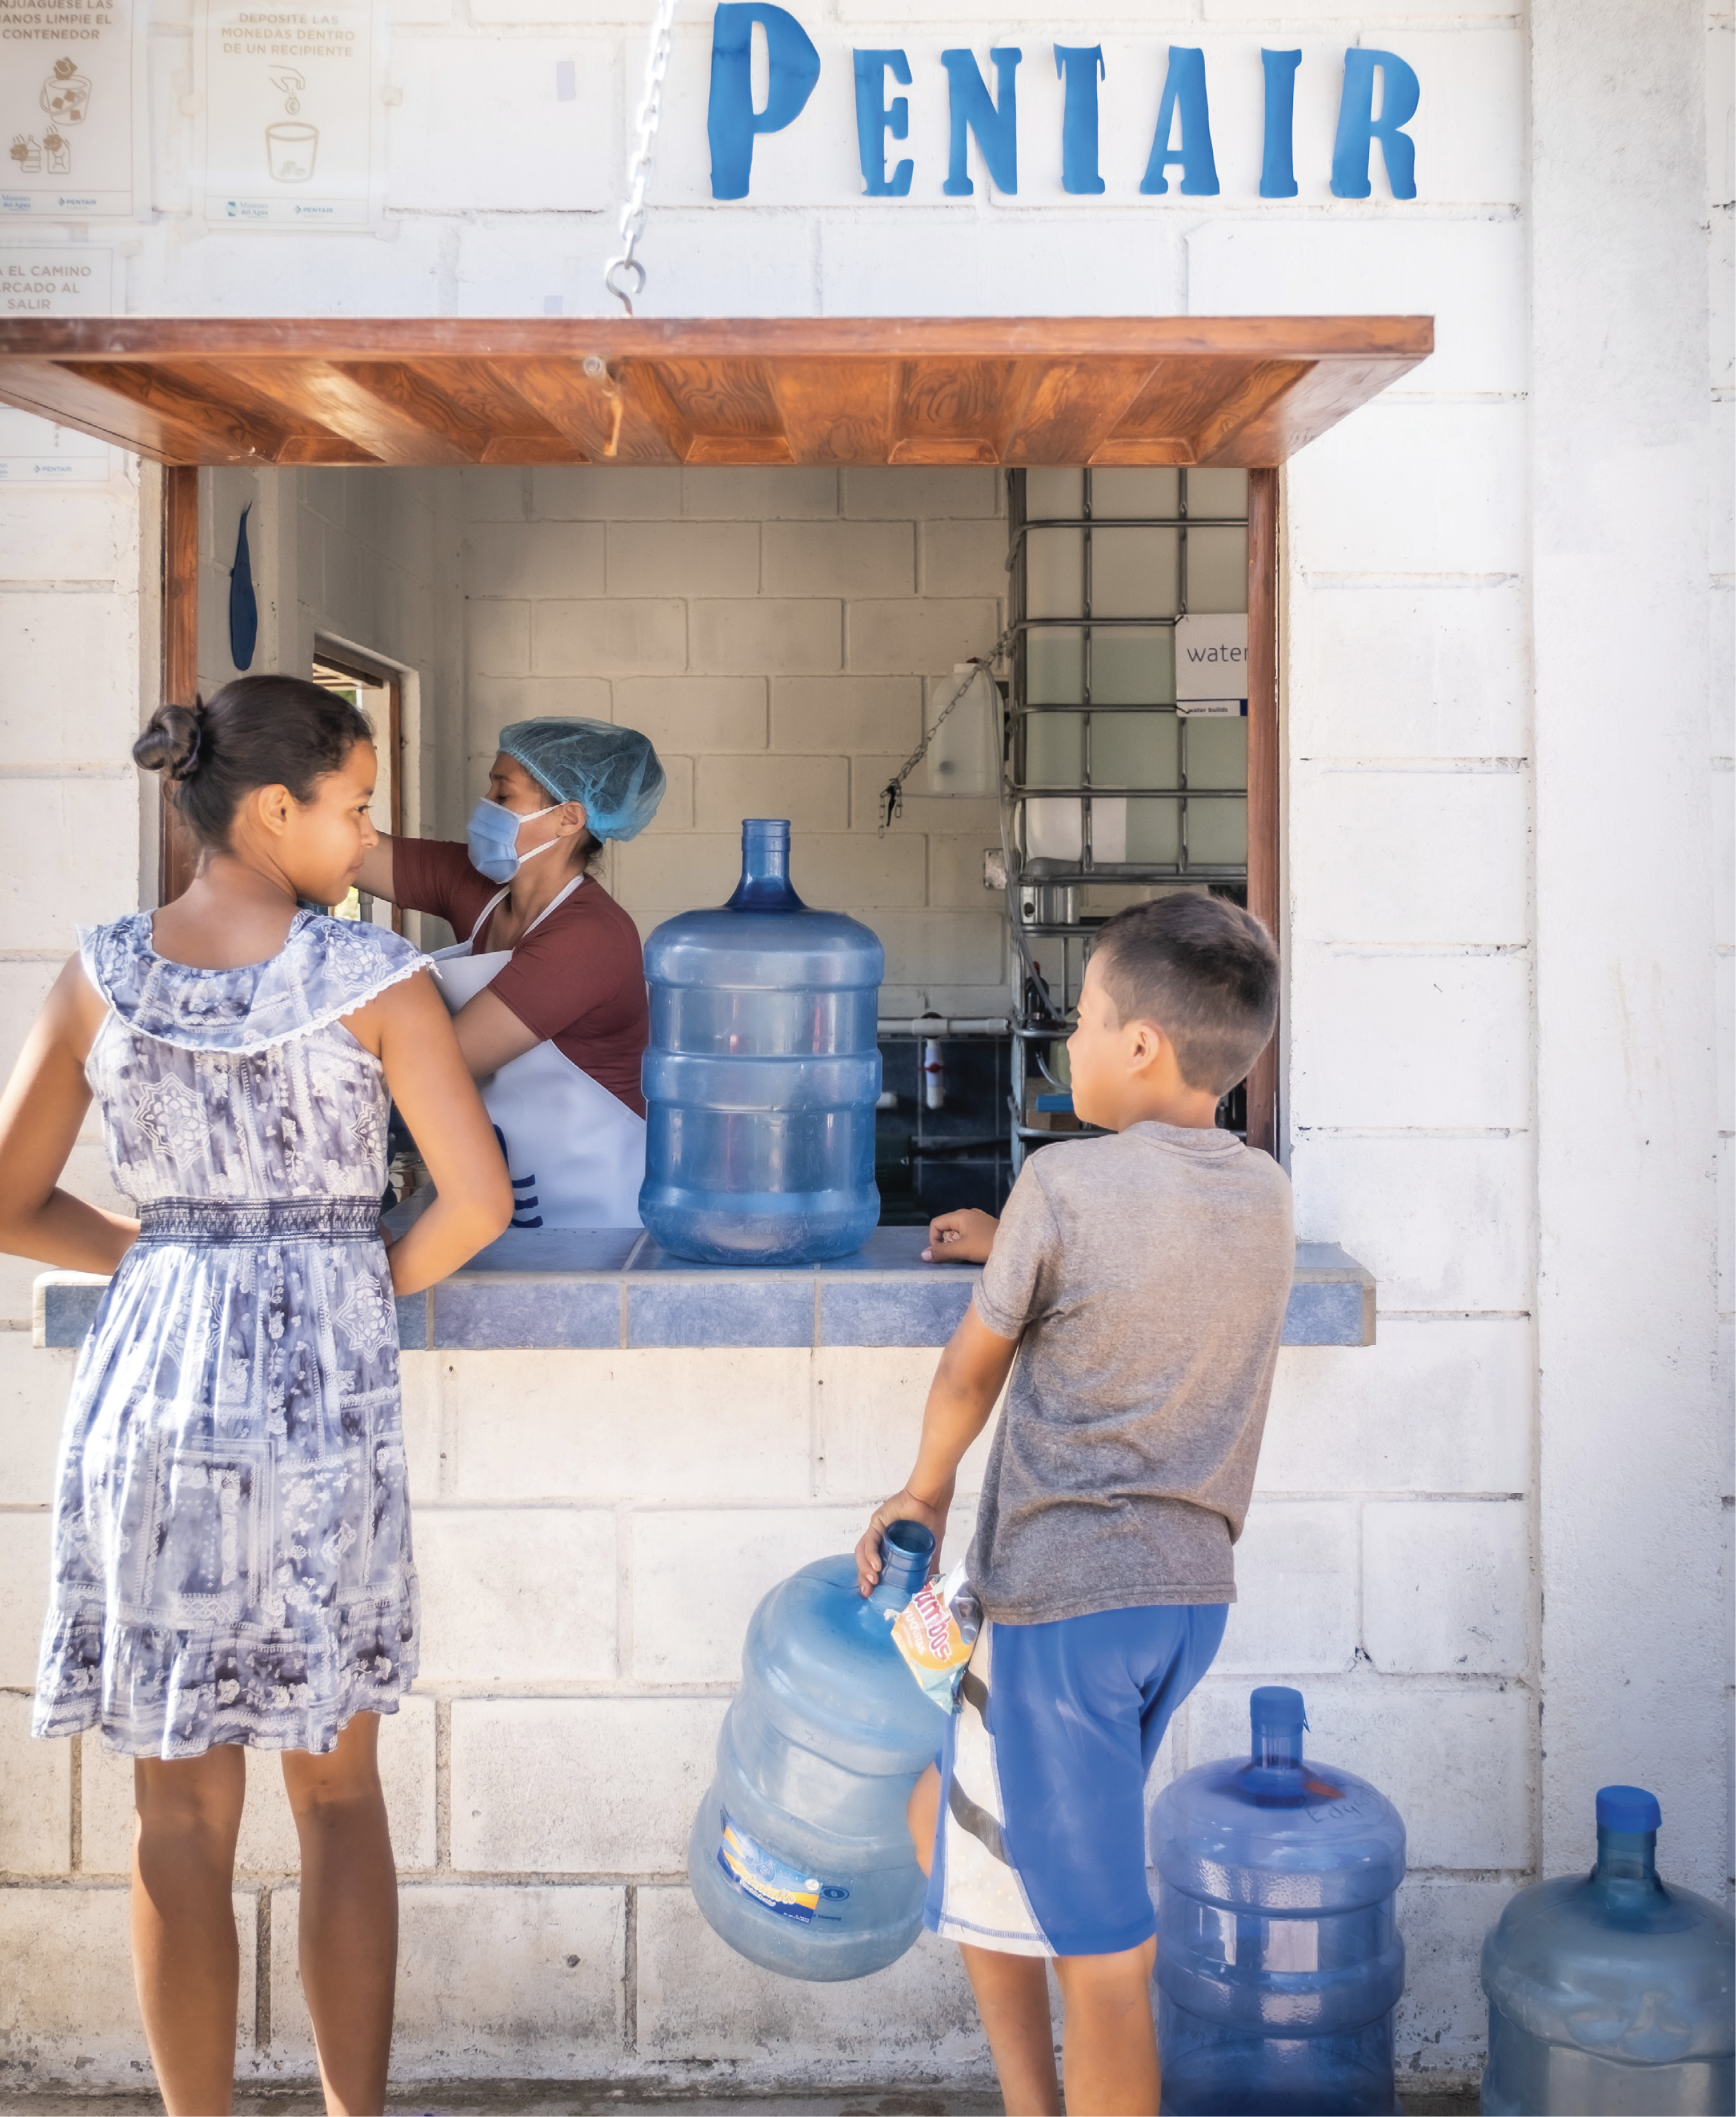 Corporate sponsors, such as Pentair, Grundfos, and OxyChem, provide supplies to build water treatment stations like this one in Honduras. Forty percent of the nonprofit’s income comes from strategic partners with numerous corporations and nongovermental organizations.